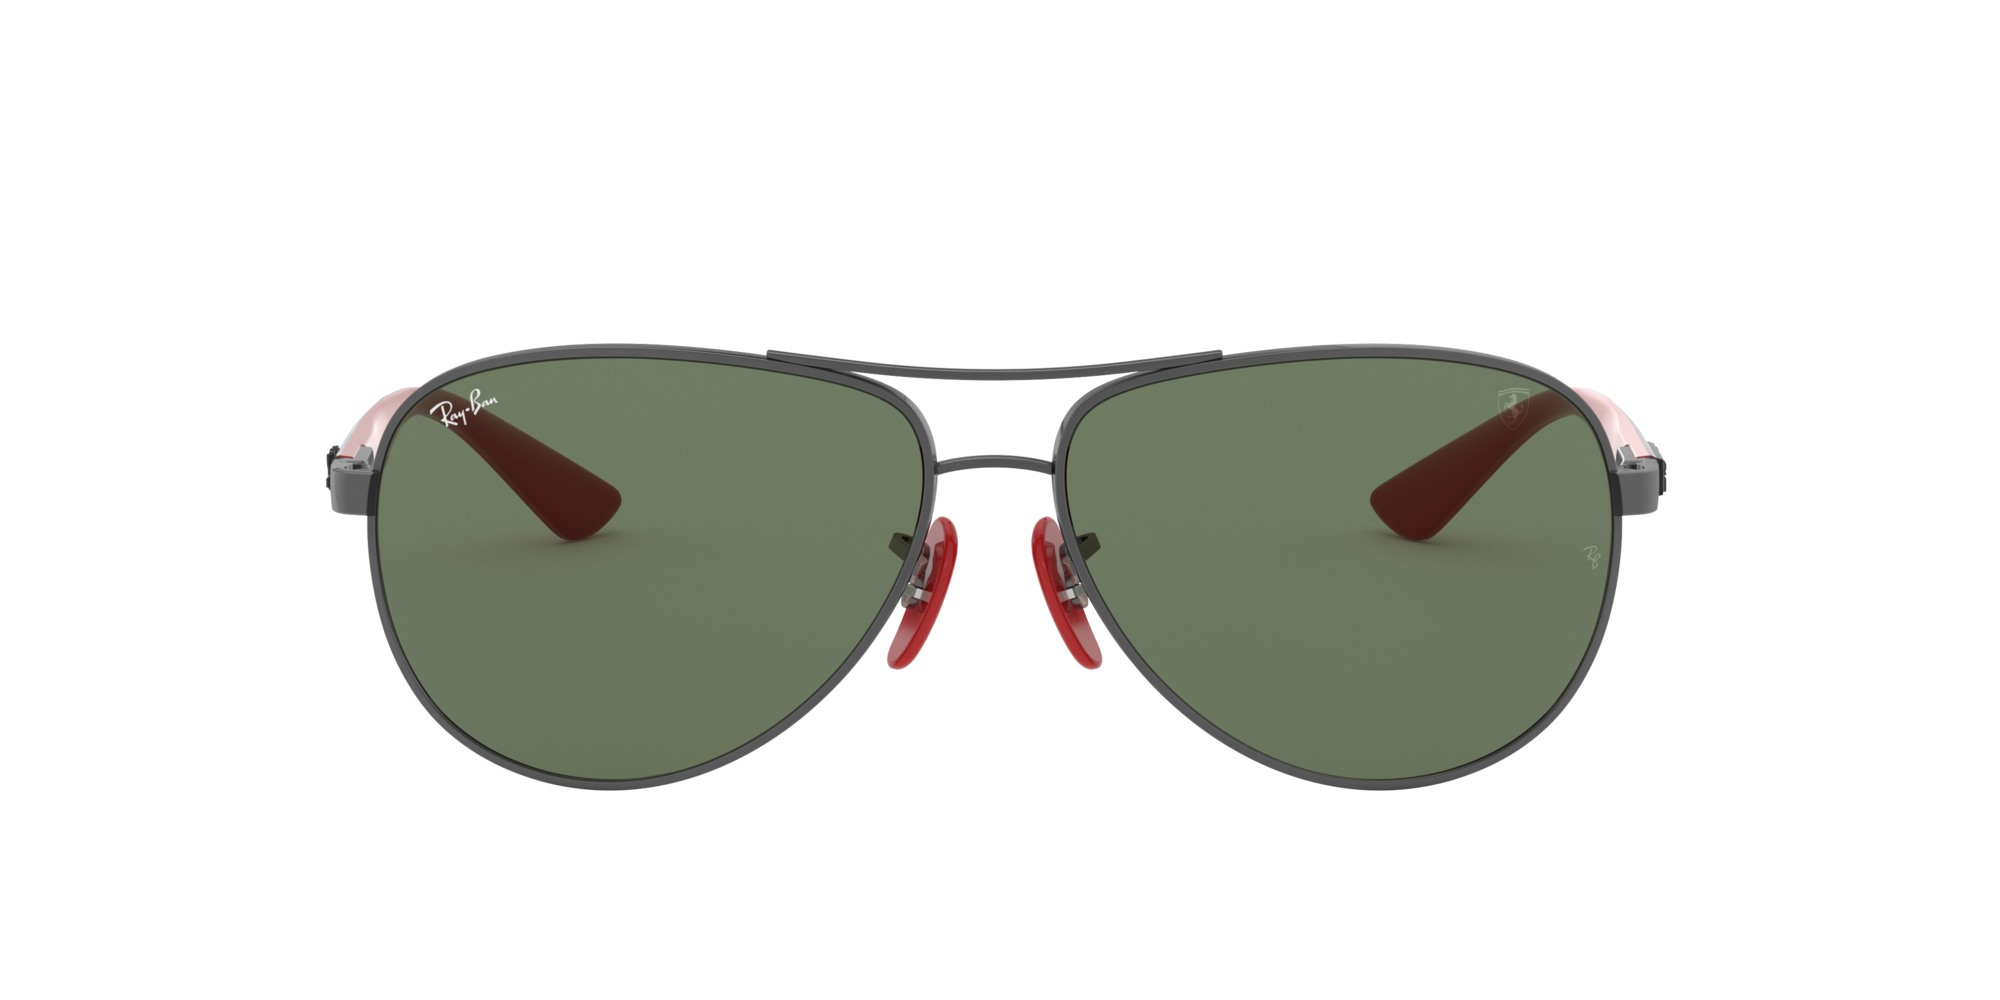 ray ban sunglasses lenscrafters